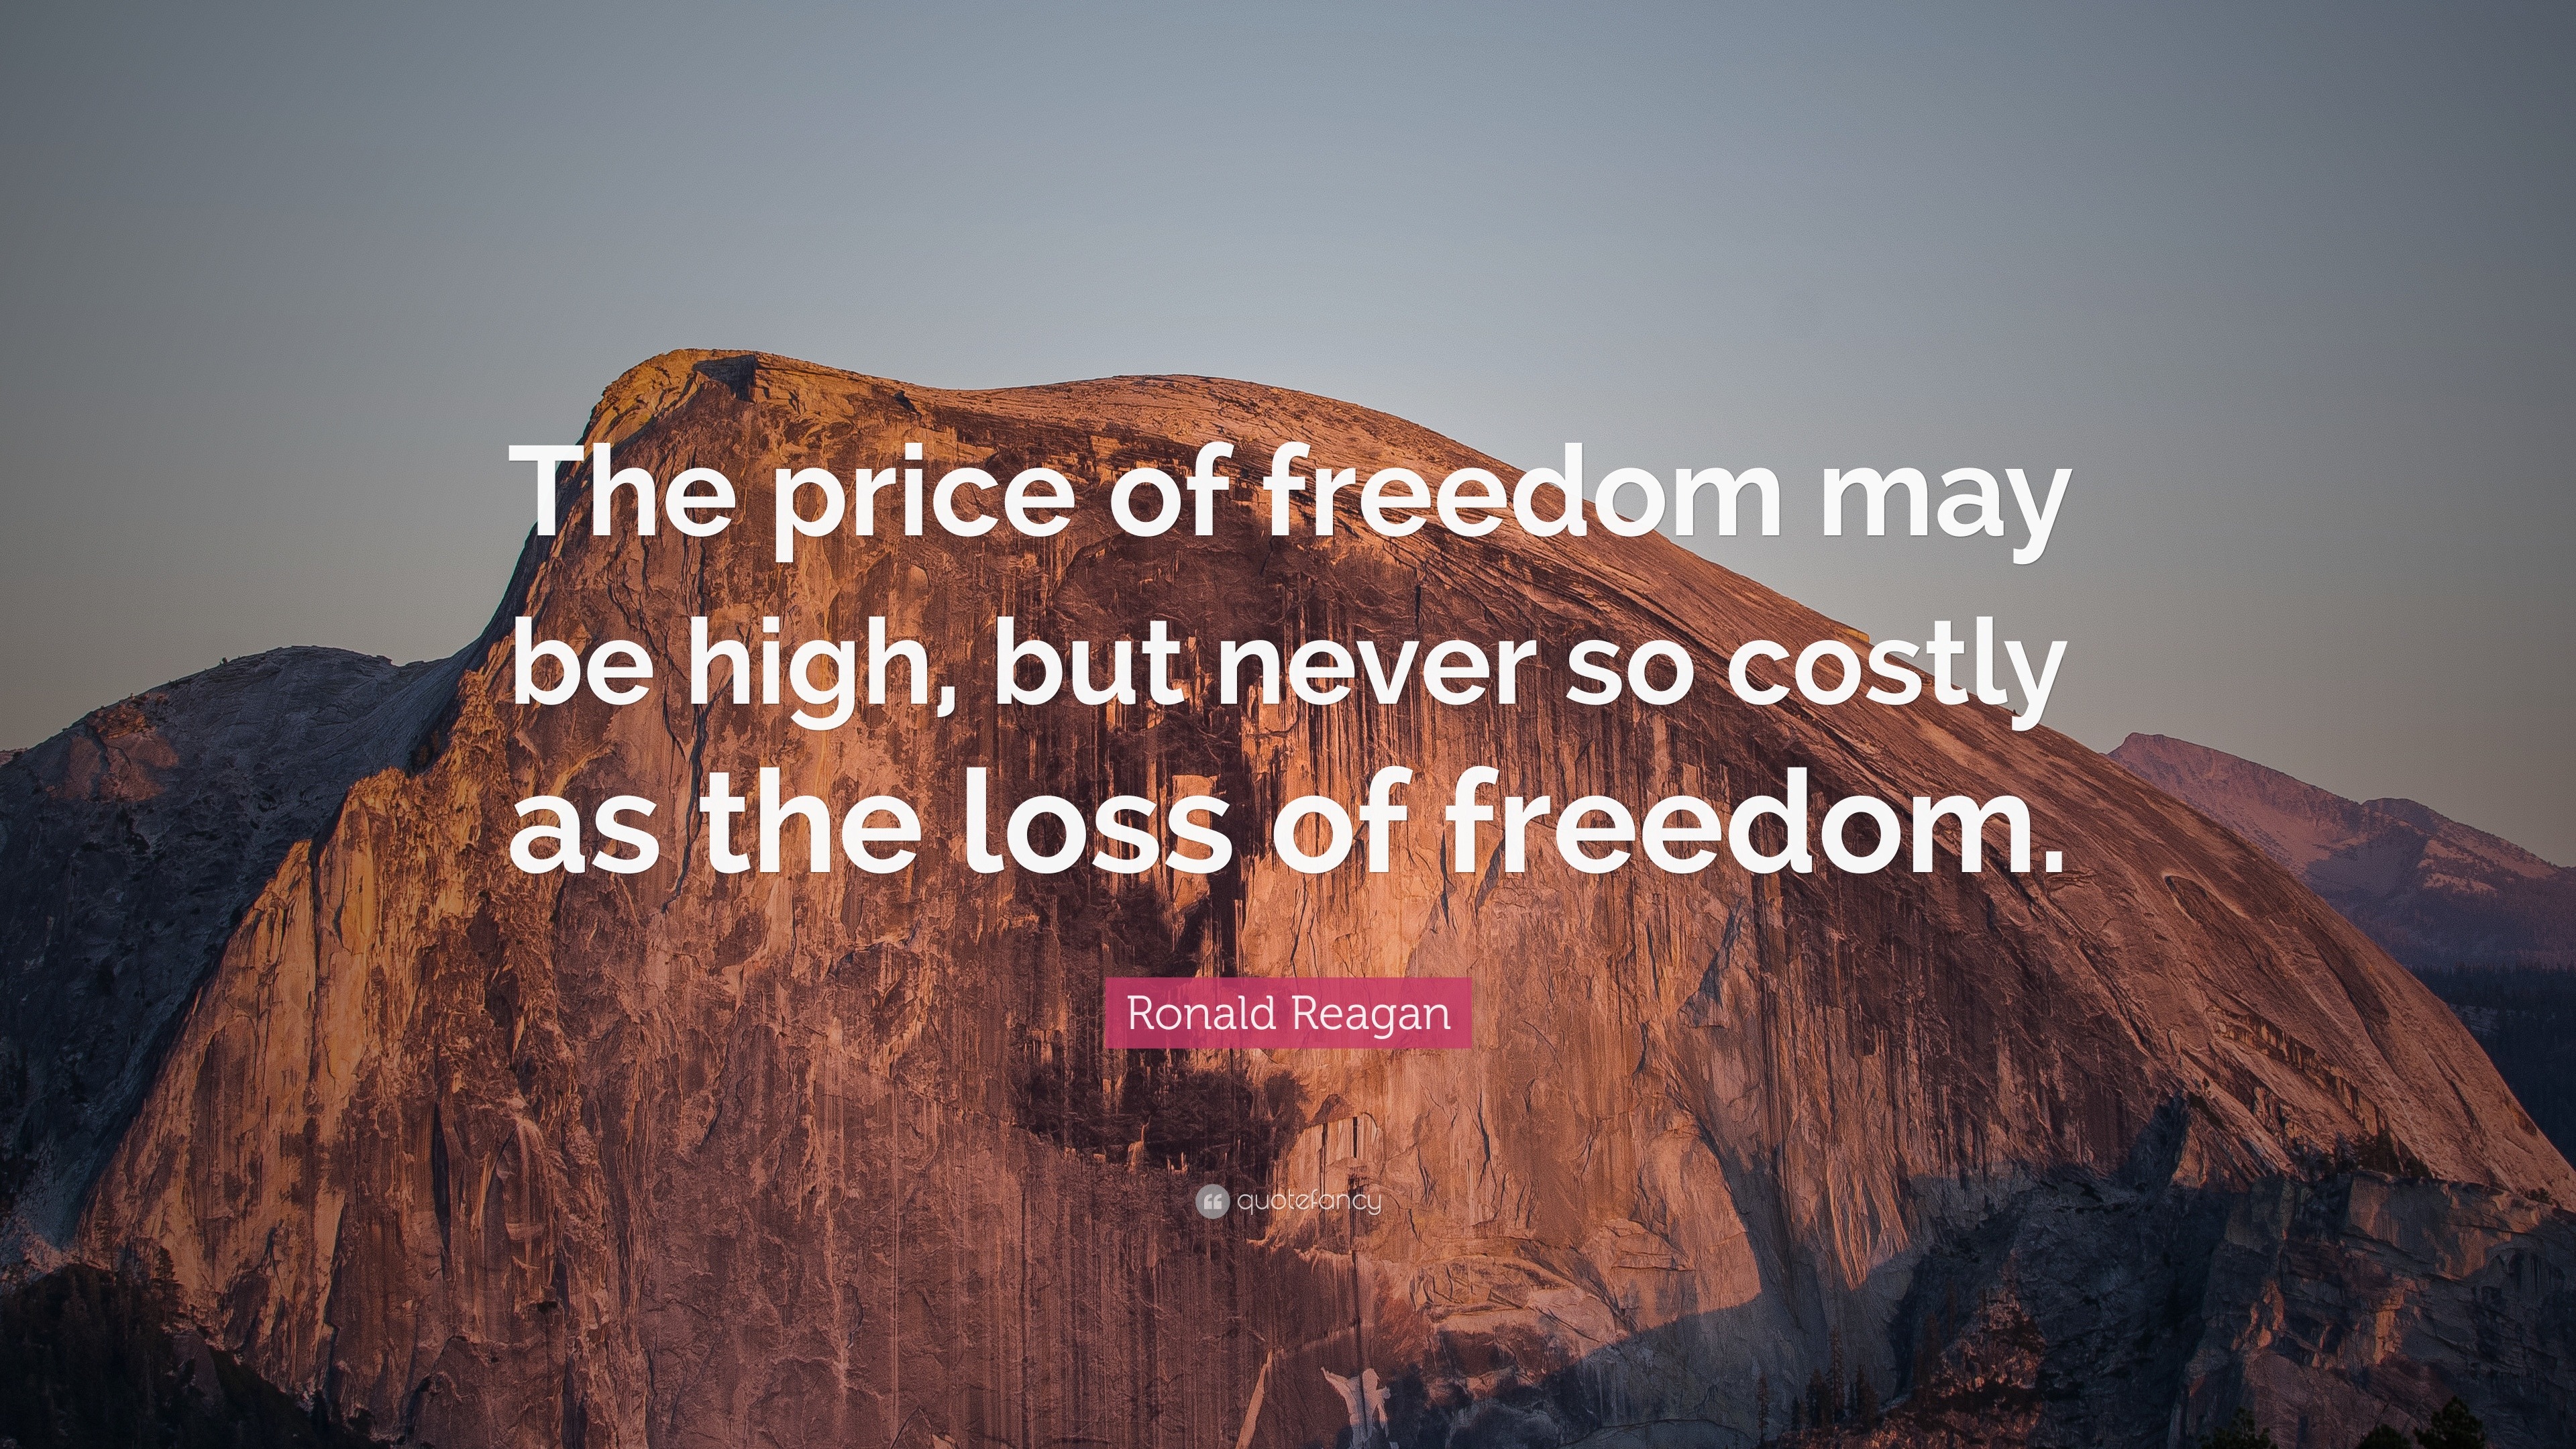 Ronald Reagan Quote: “The price of freedom may be high, but never so